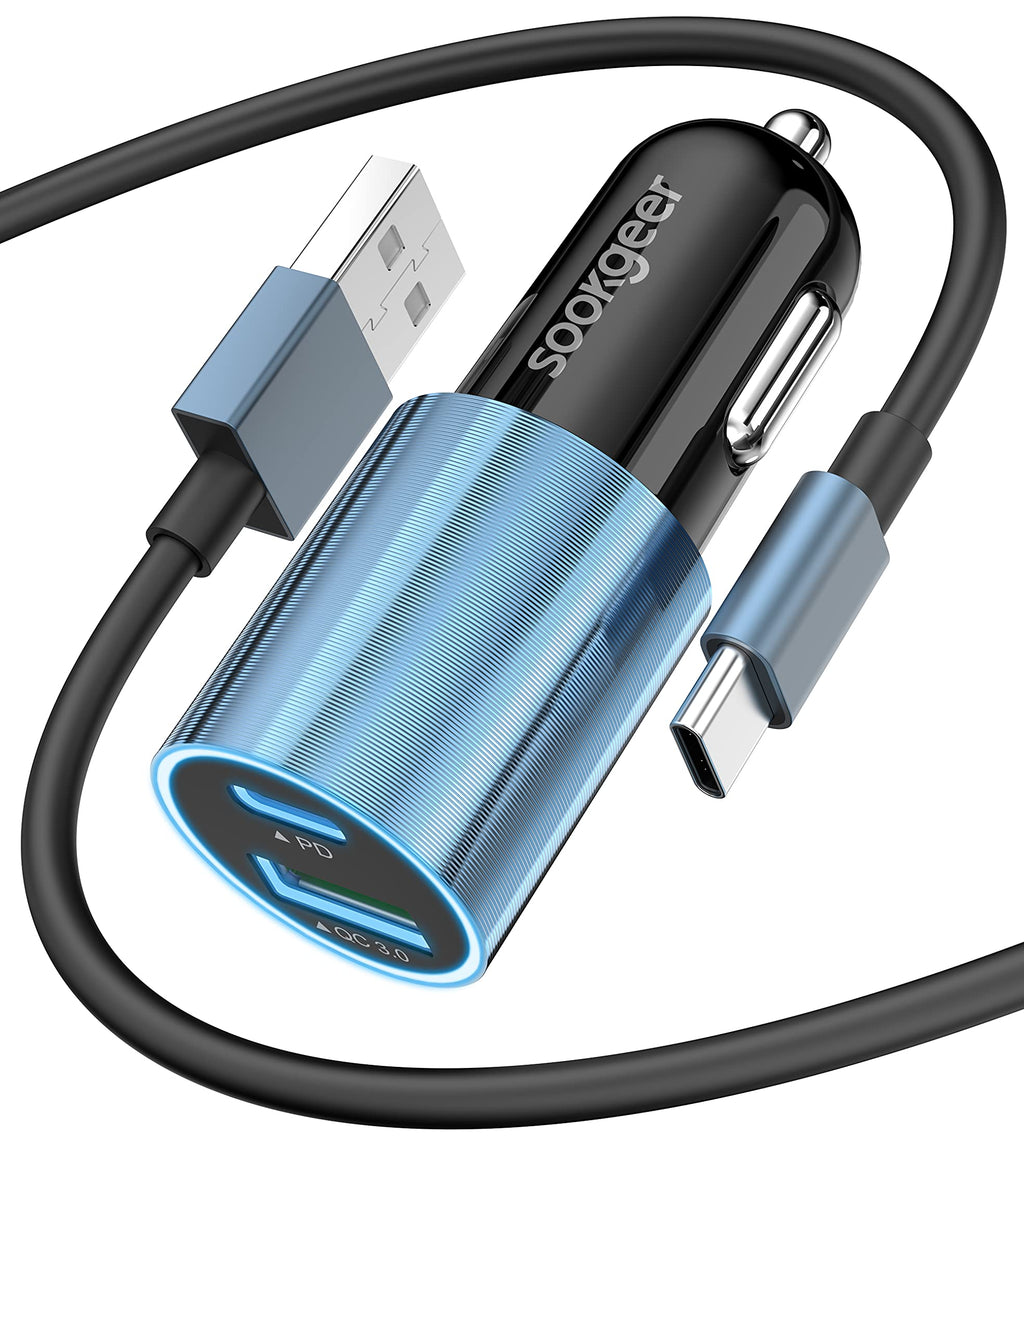  [AUSTRALIA] - USB C Car Charger 45w Car Charger Adapter Fast Charging USB Cable[3.3ft] Compatible for iPhone13/12/11Pro/MAX/XS/XR/8/SE 2020/iPad 8th/Pro/Air4/mini, Google Pixel 5, Samsung Cigarette USB Charger